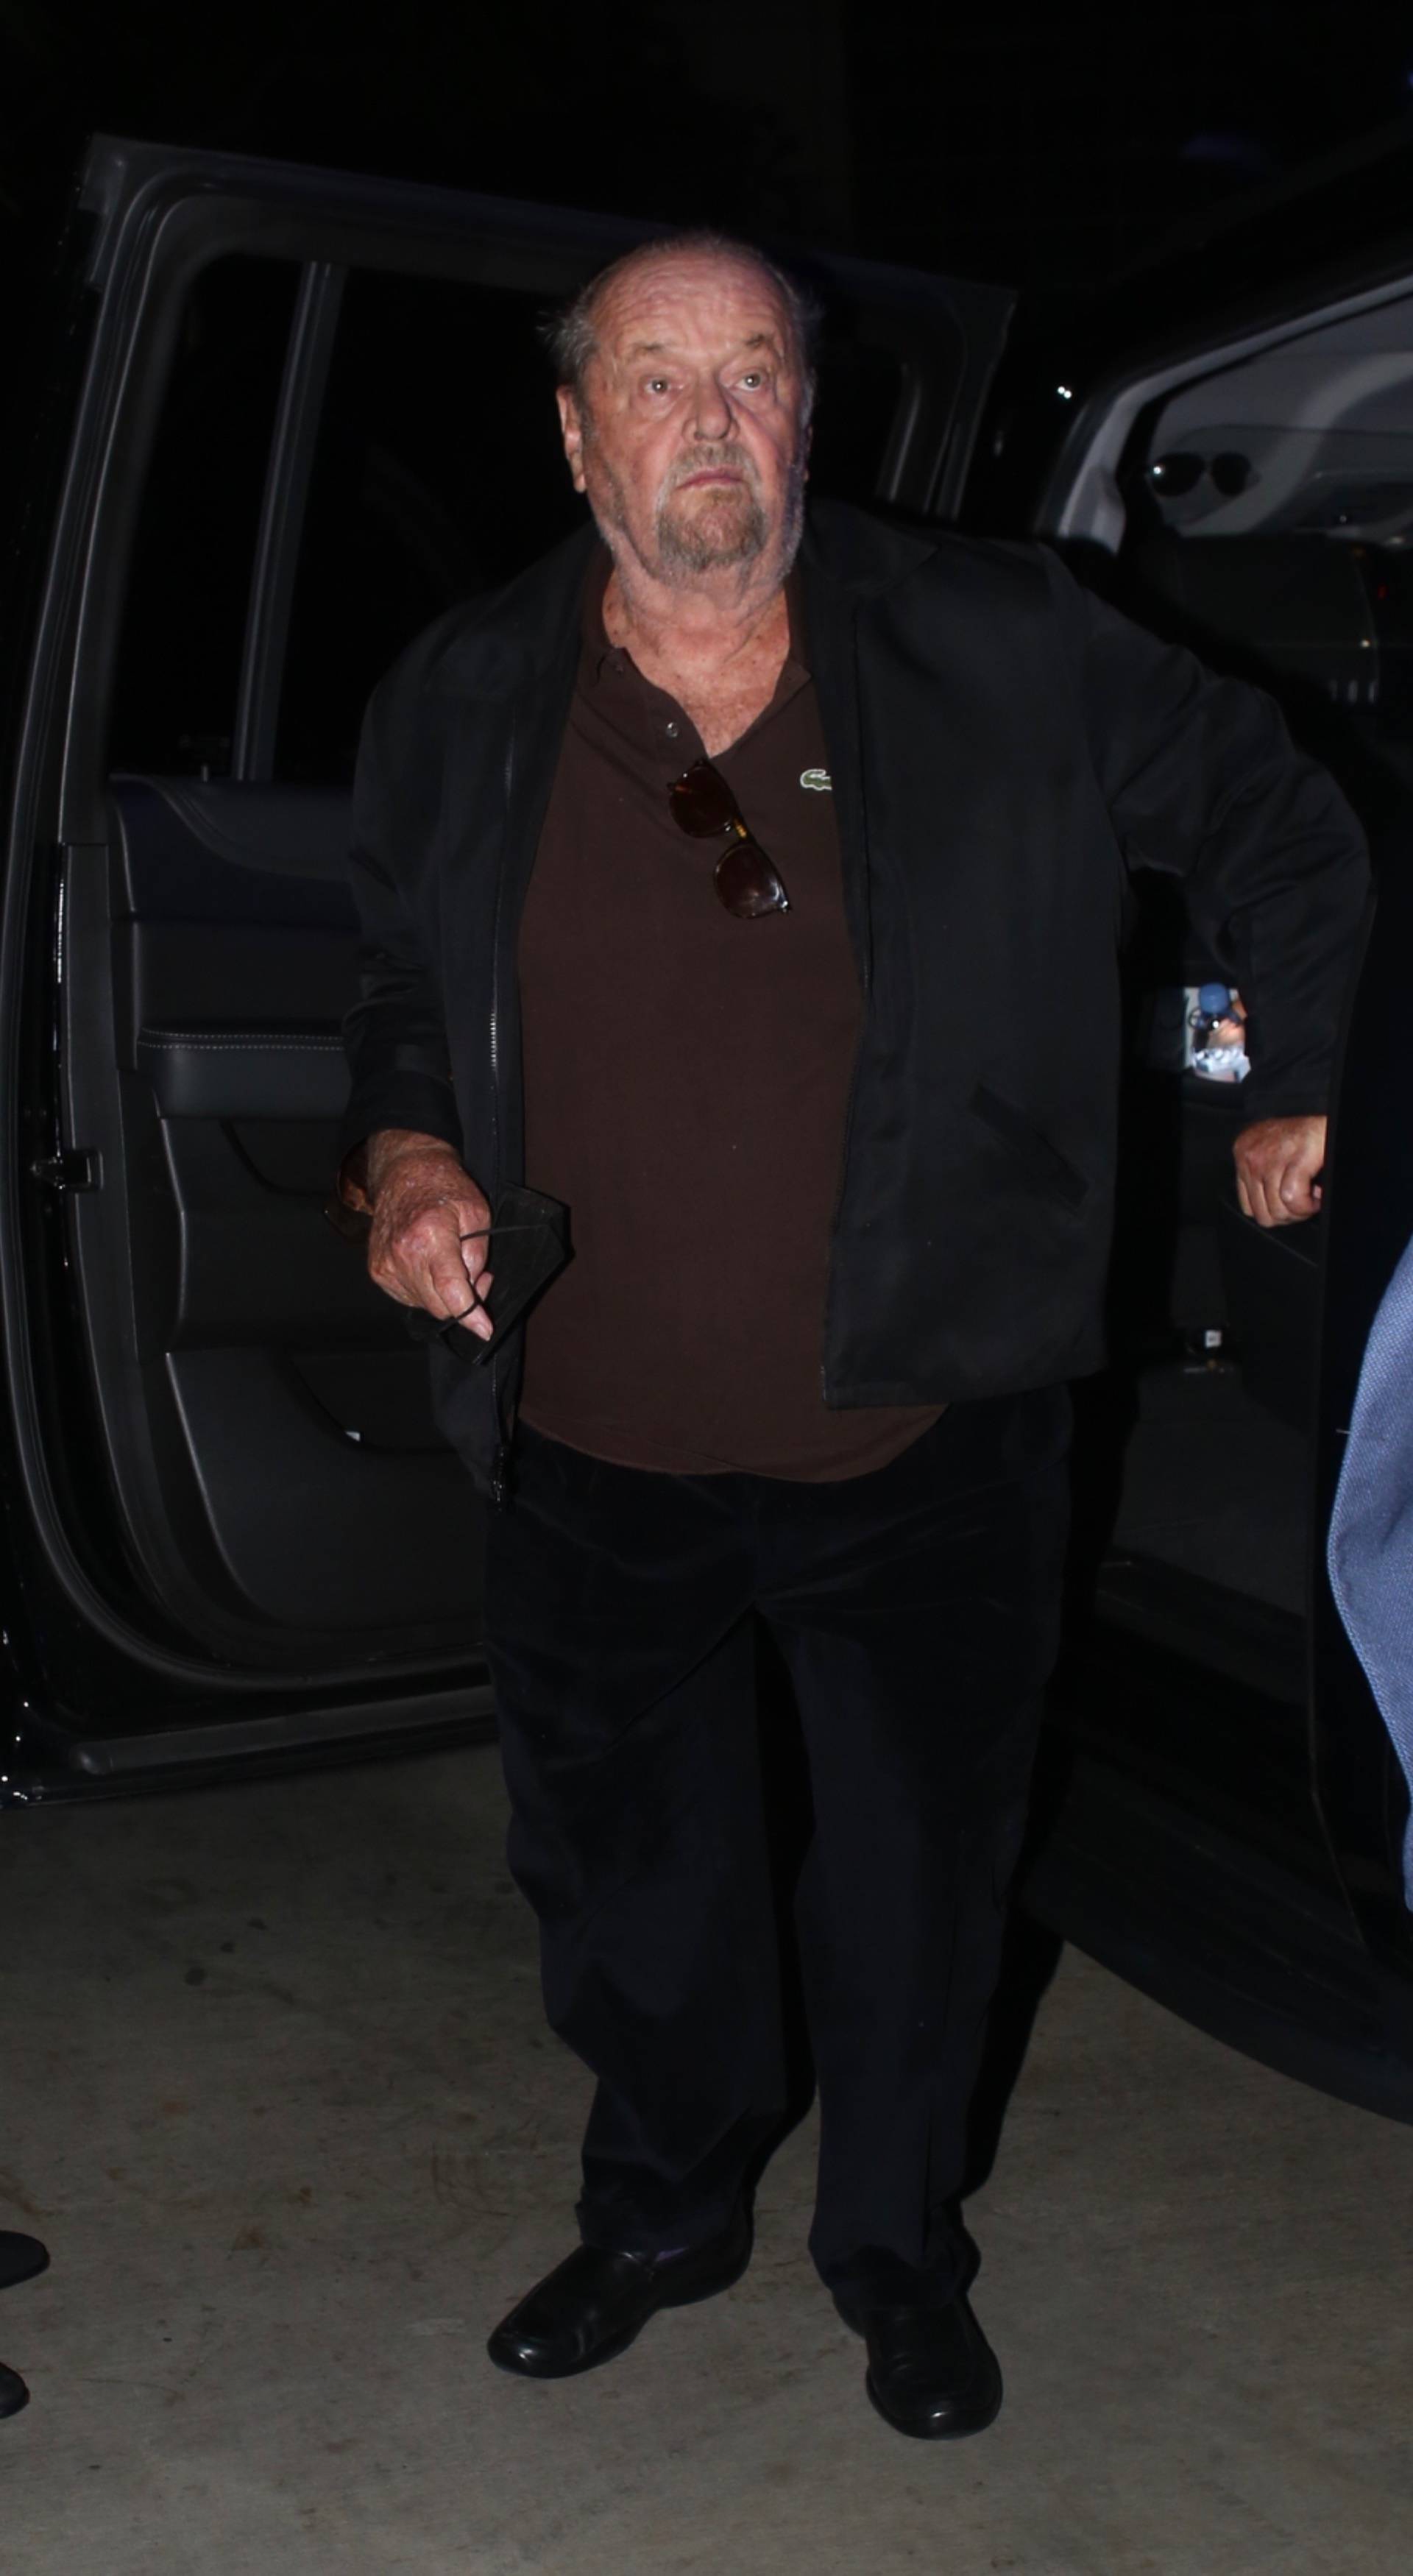 Jack Nicholson looks healthy making a rare appearance for the Lakers game